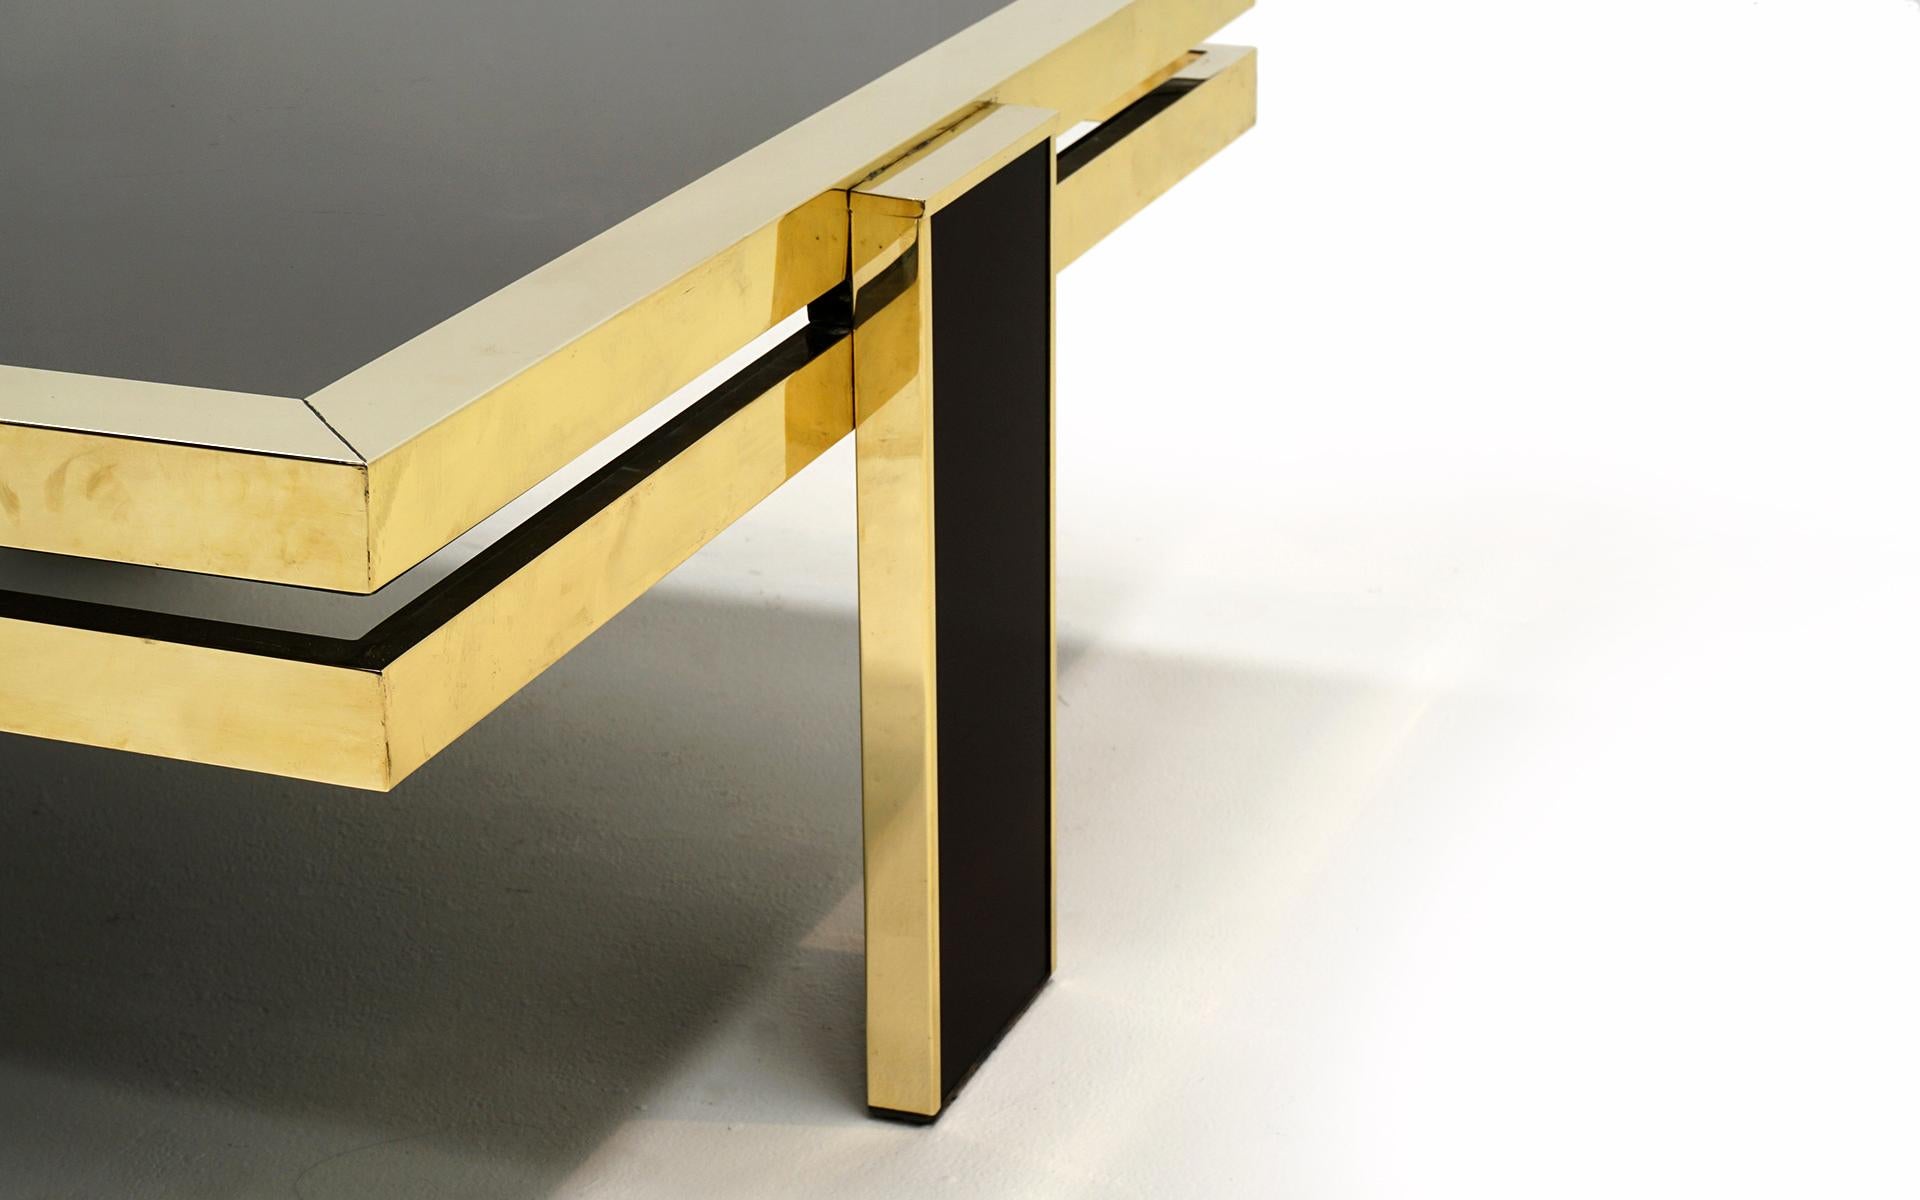 Brass and Colored Glass Coffee Table by Giacomo Sinopoli for Liwan's Rome 1970s  For Sale 2